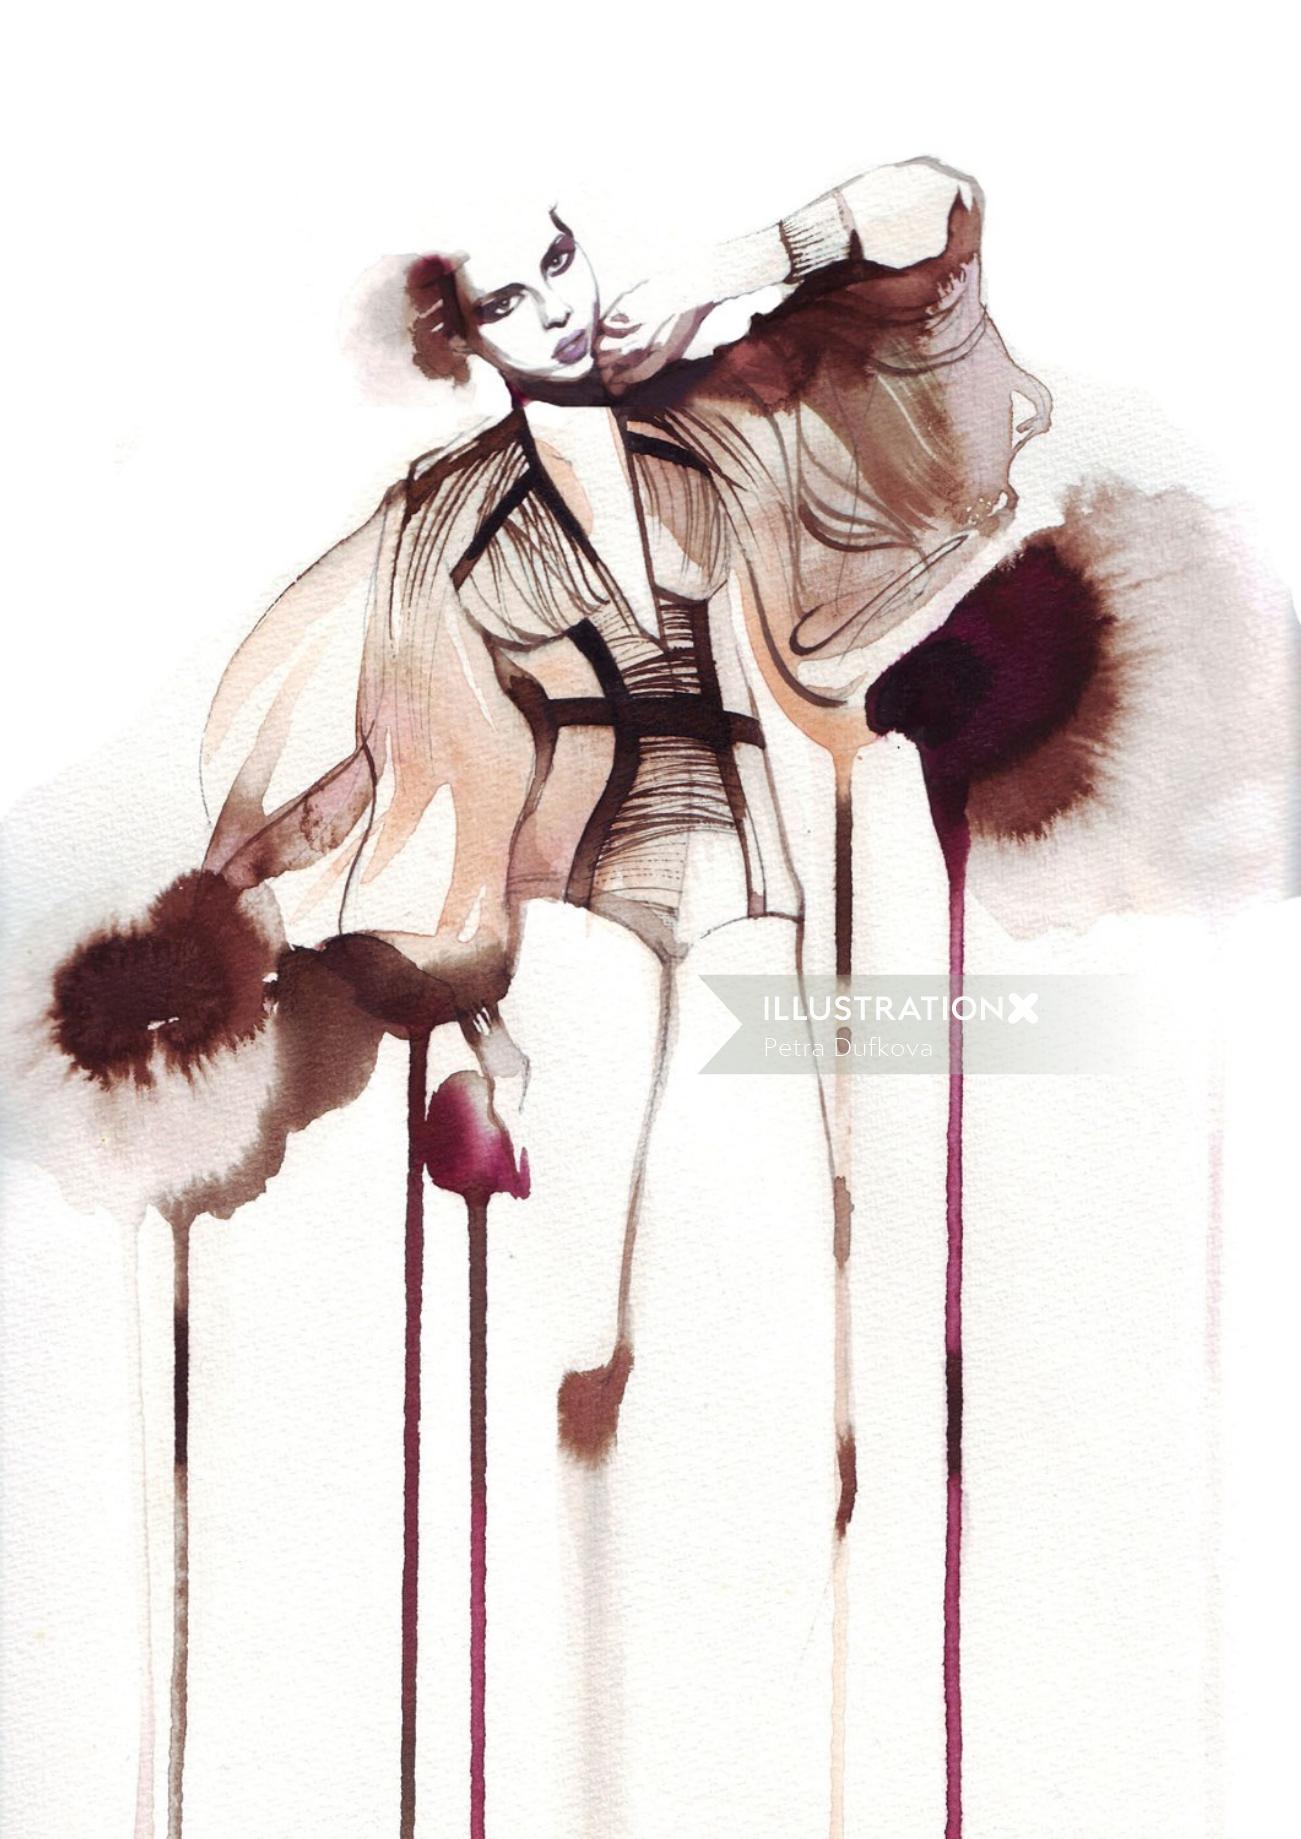 Watercolor dripping of model art